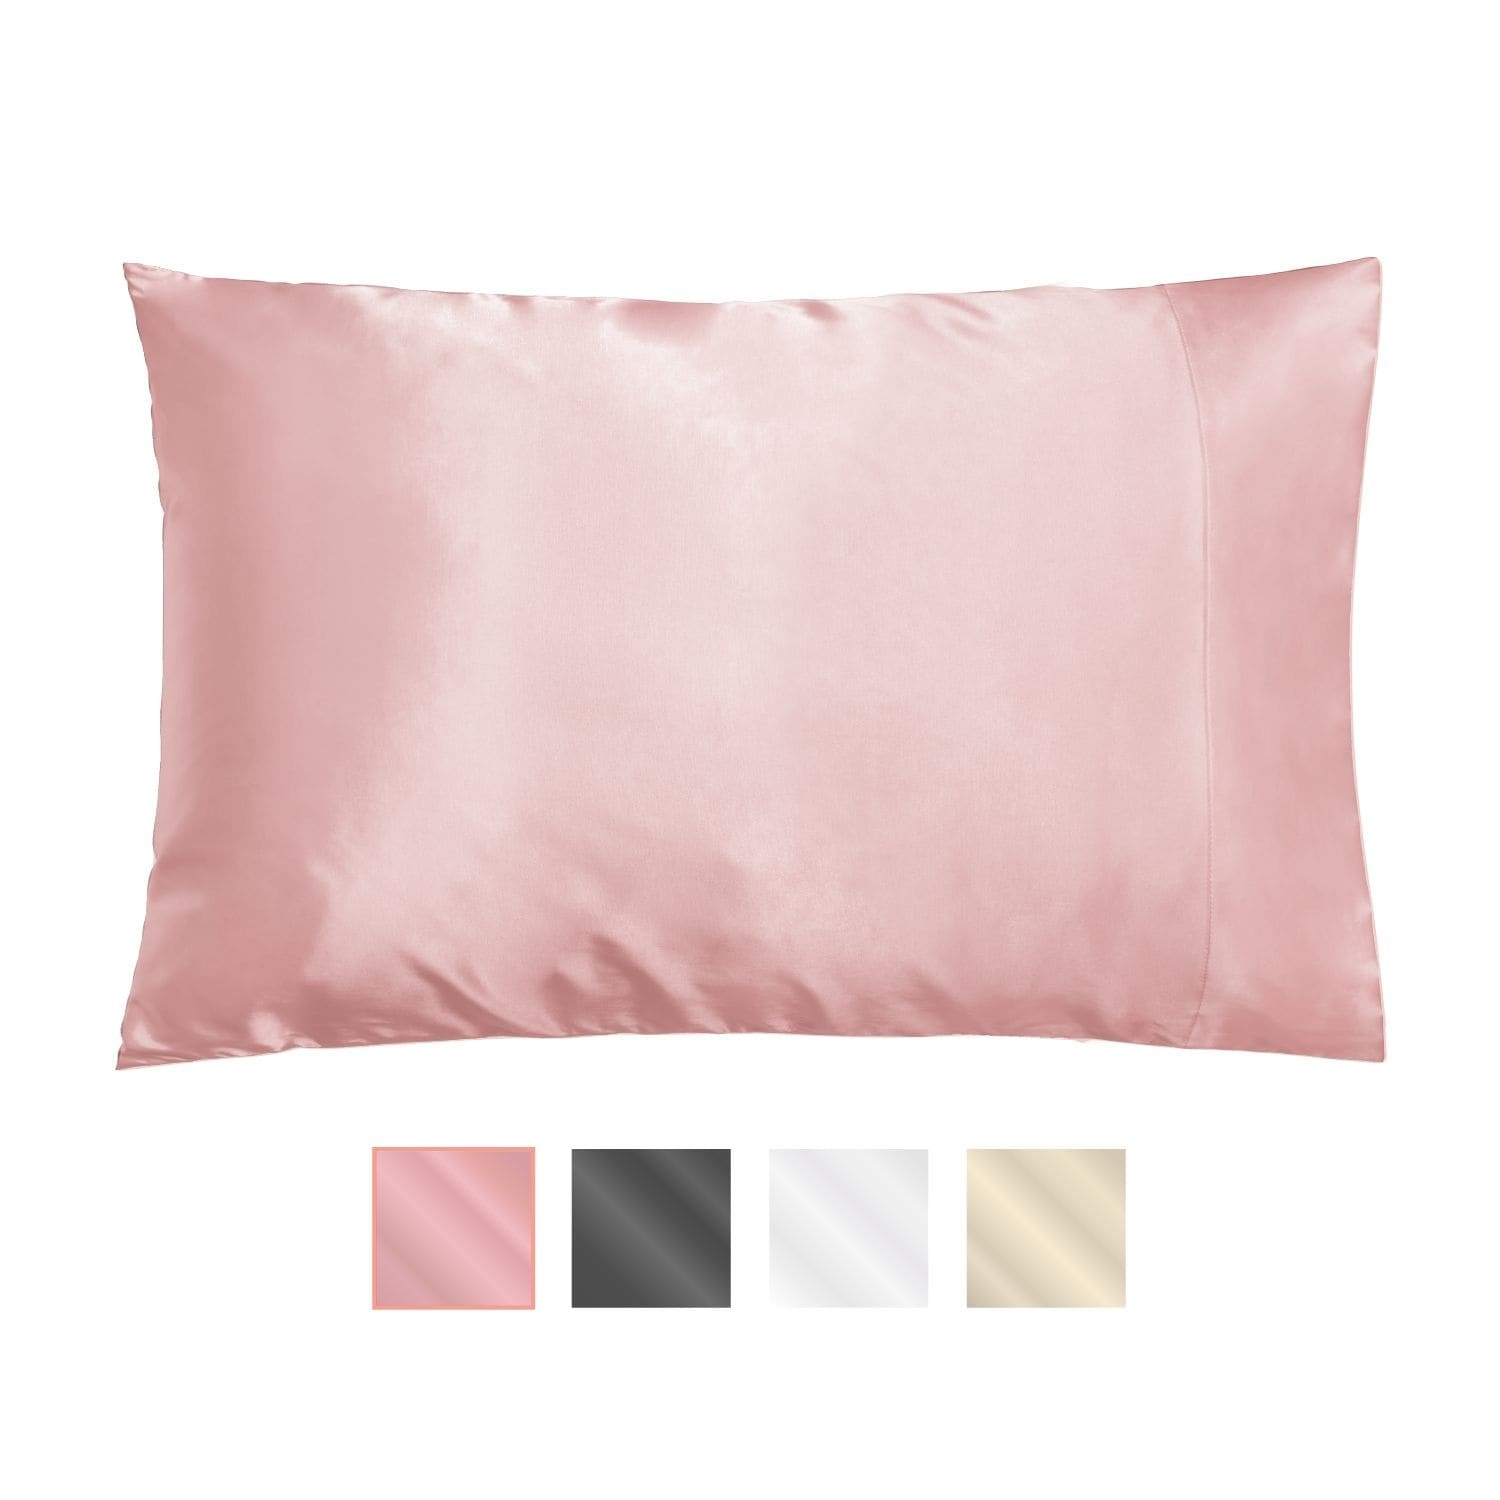 SHINE by NIGHT Satin Pillowcase for Skin & Hair - Super Soft Pillow Covers  - On Sale - Bed Bath & Beyond - 39011441